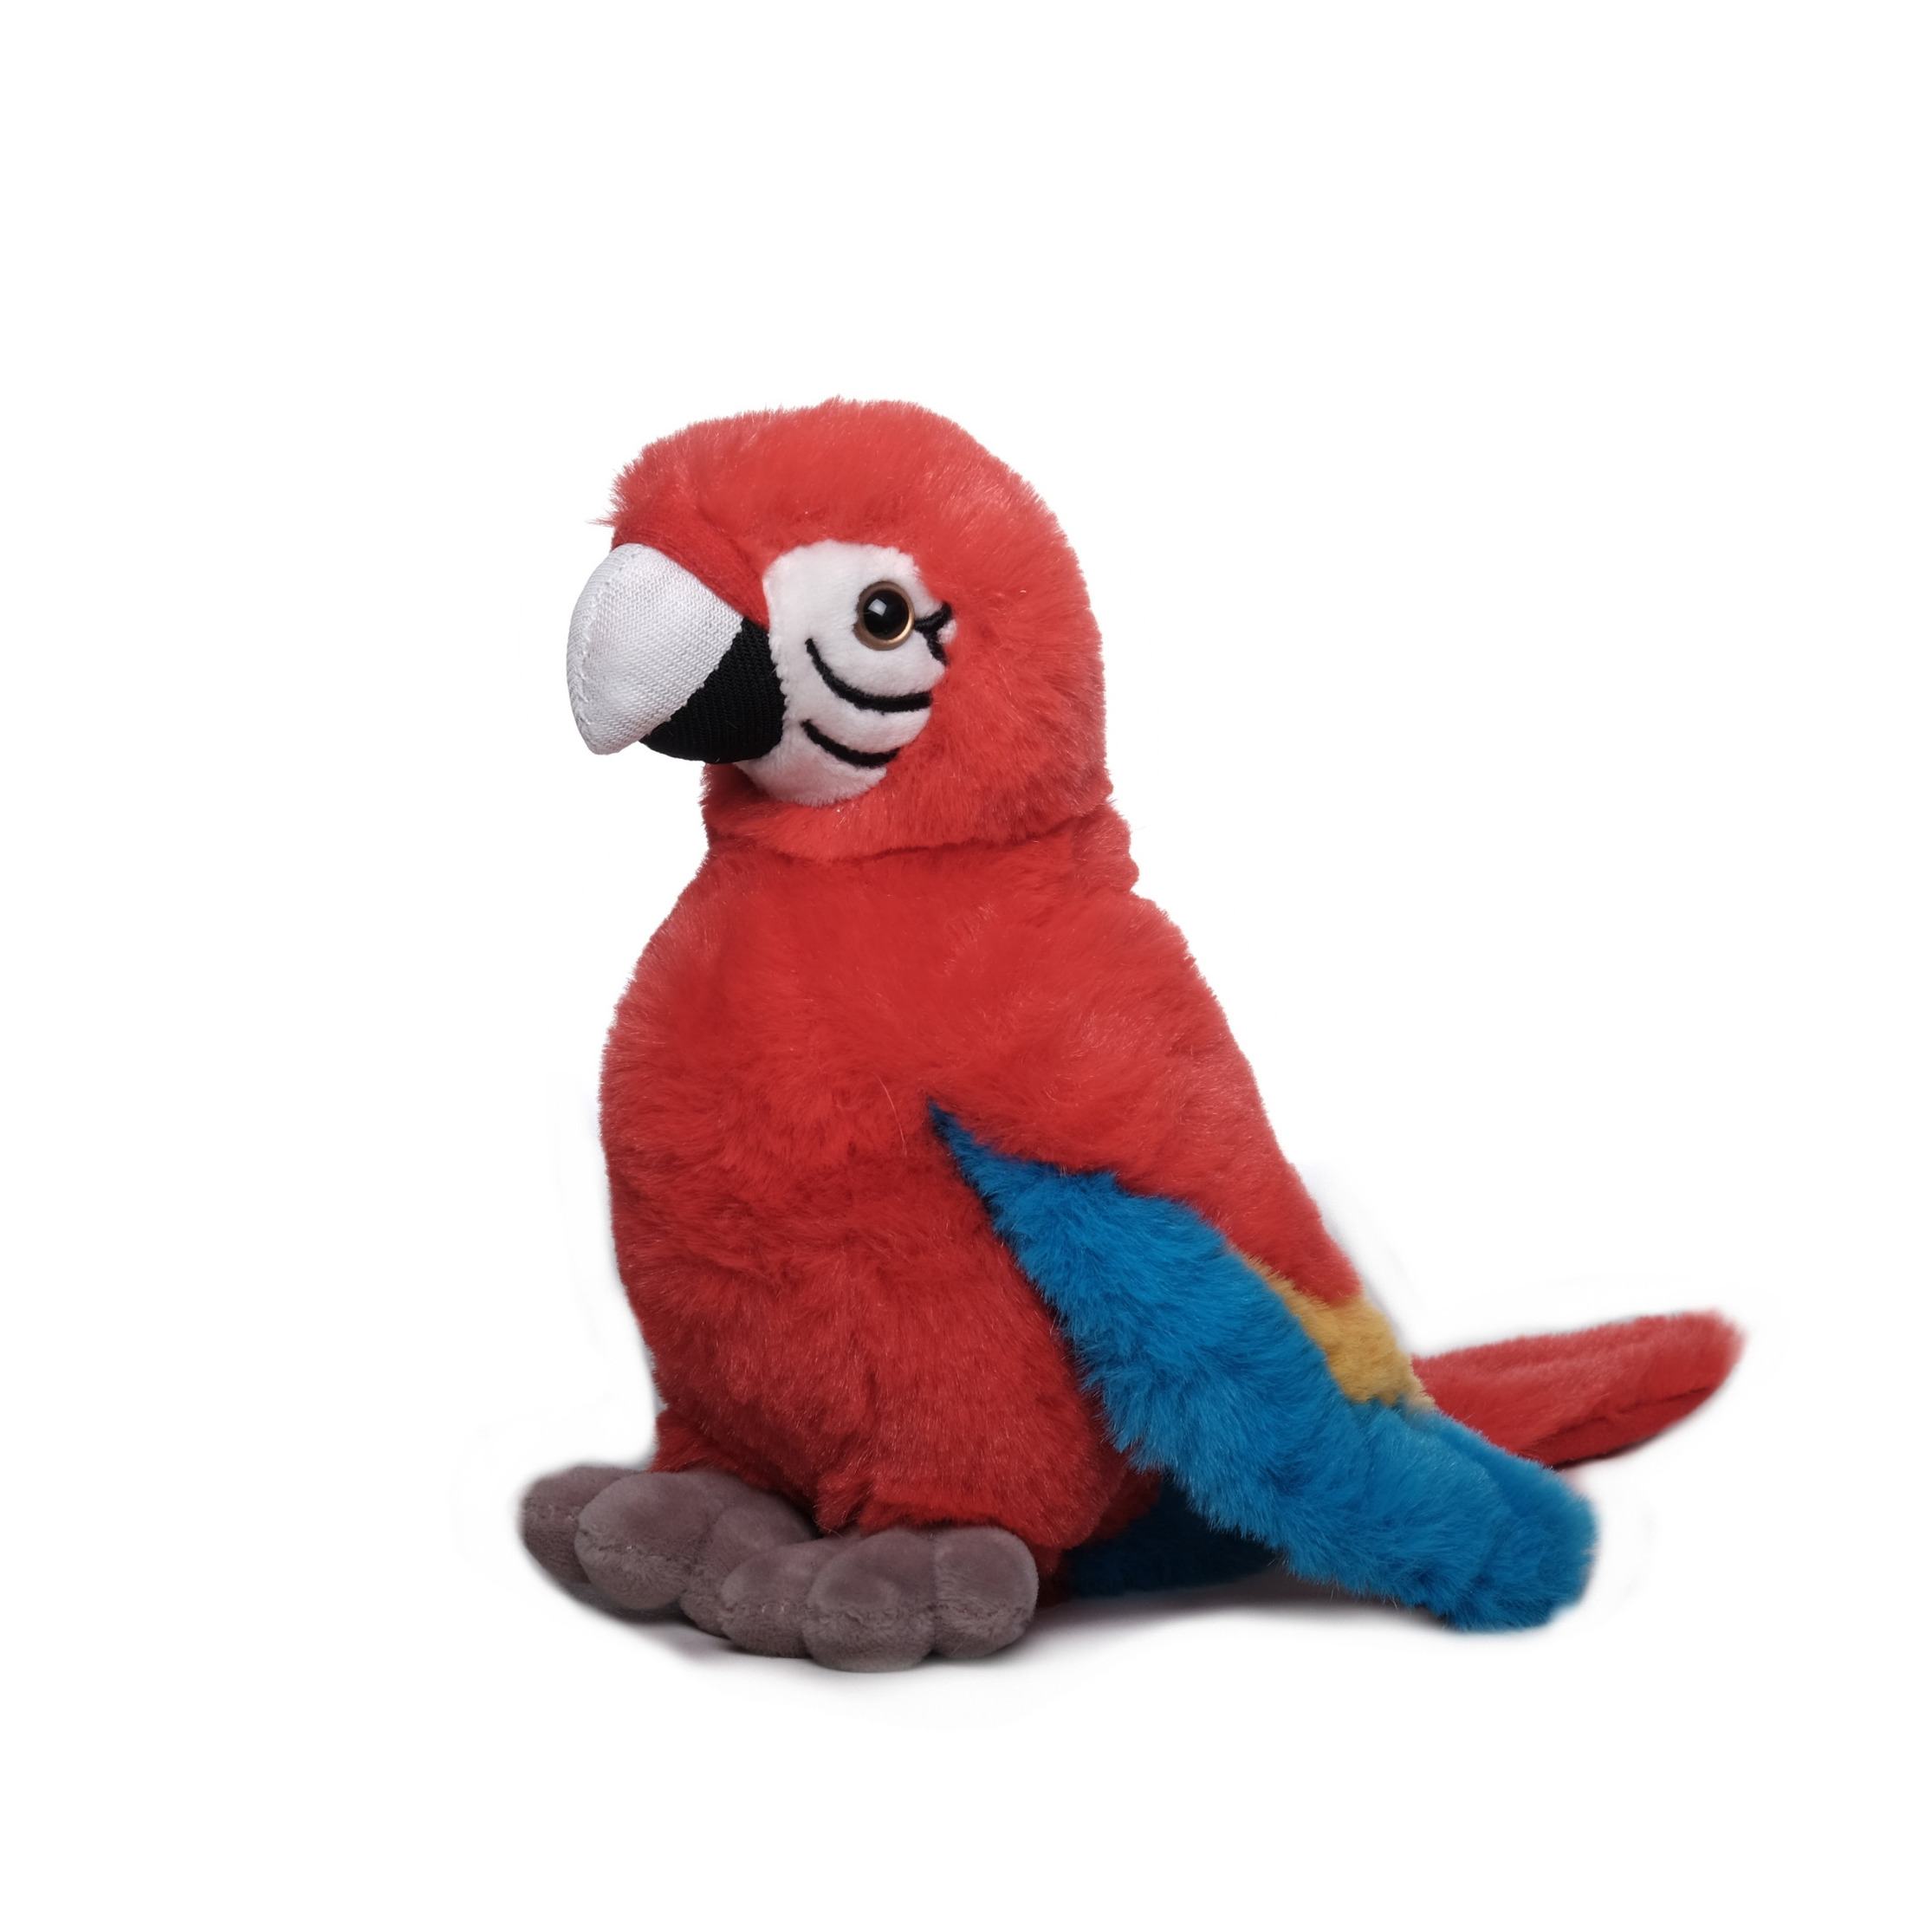 Inware Pluche papegaai vogel knuffel - rood/blauw - polyester - 20 cm -